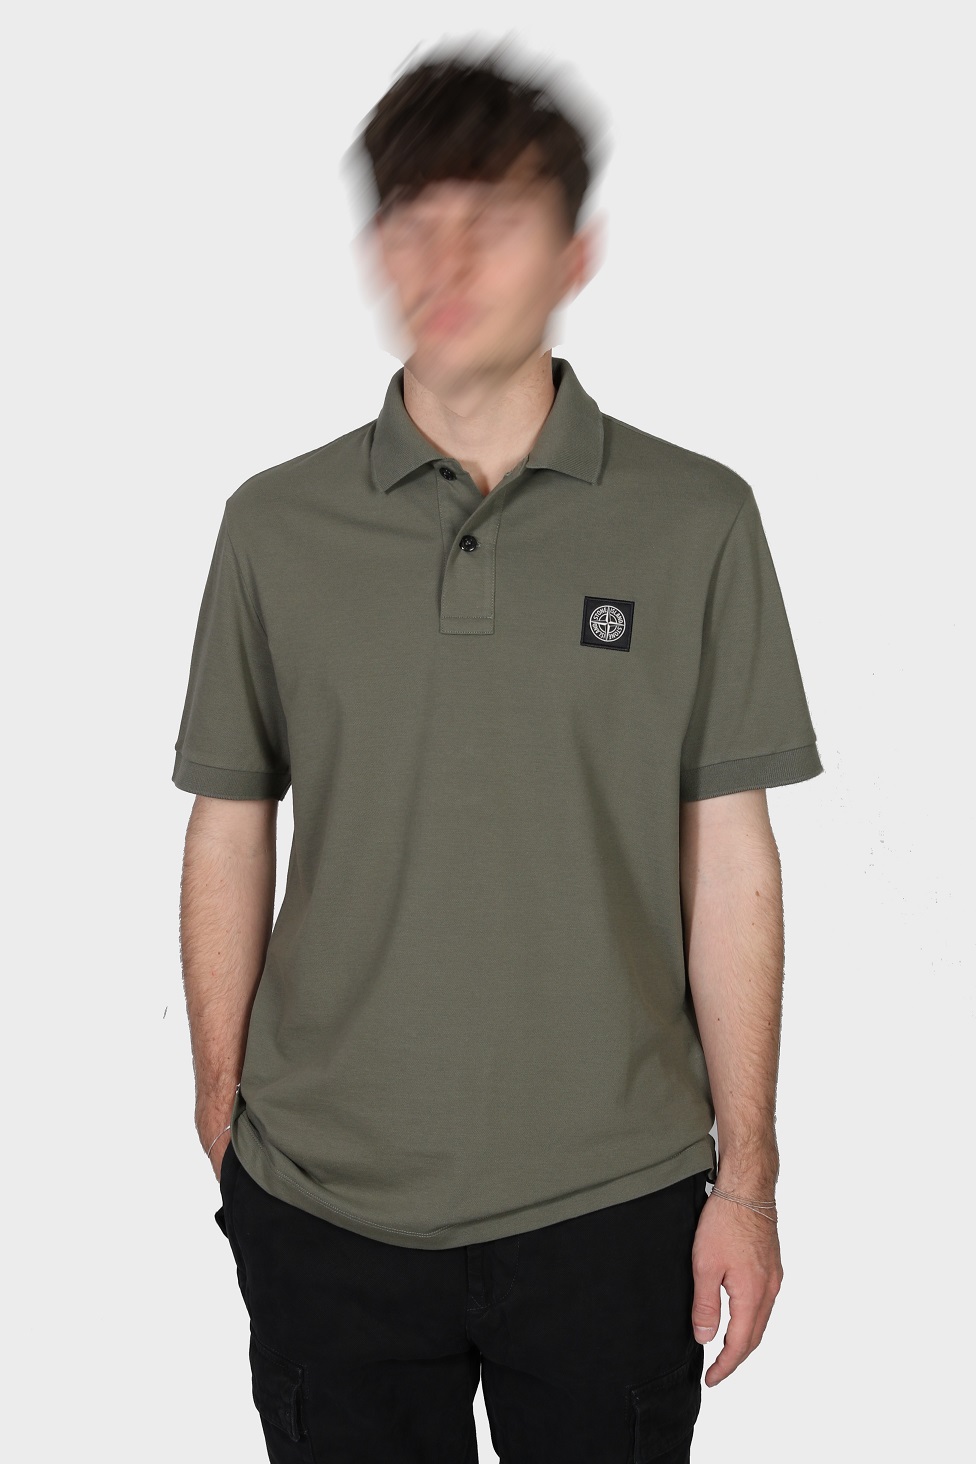 STONE ISLAND Slim Fit Polo Shirt in Olive